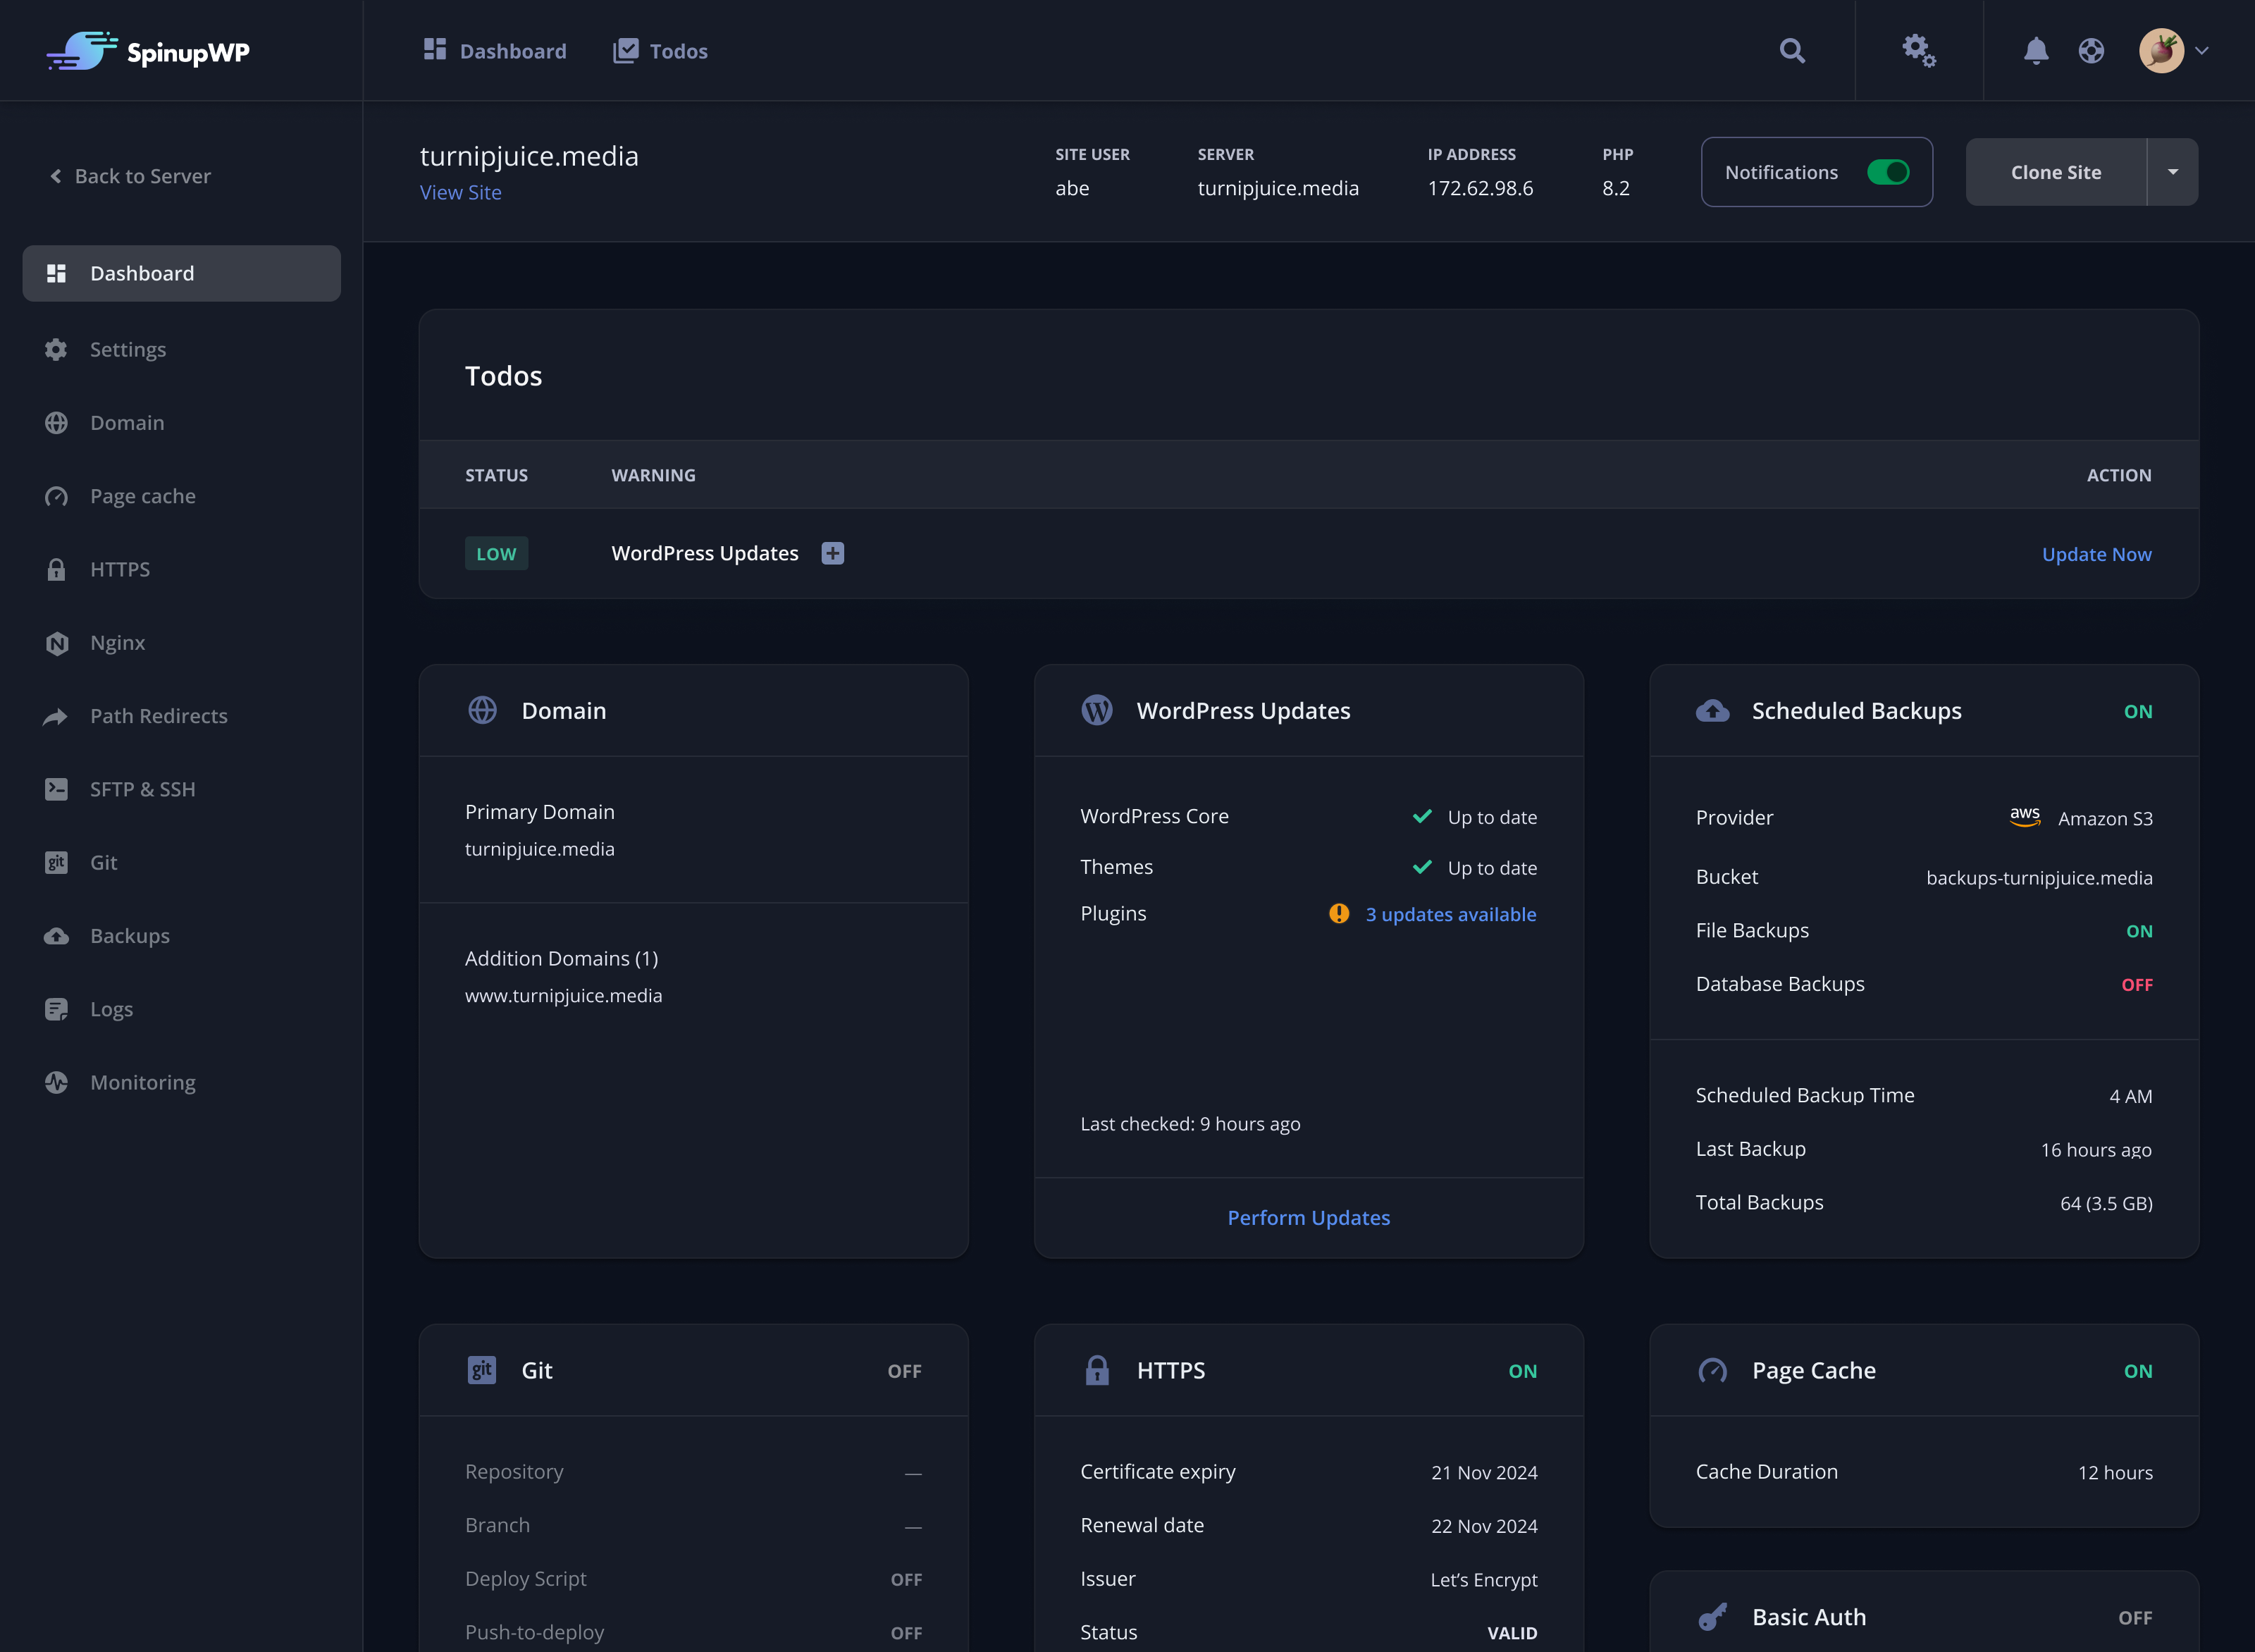 The Site Dashboard